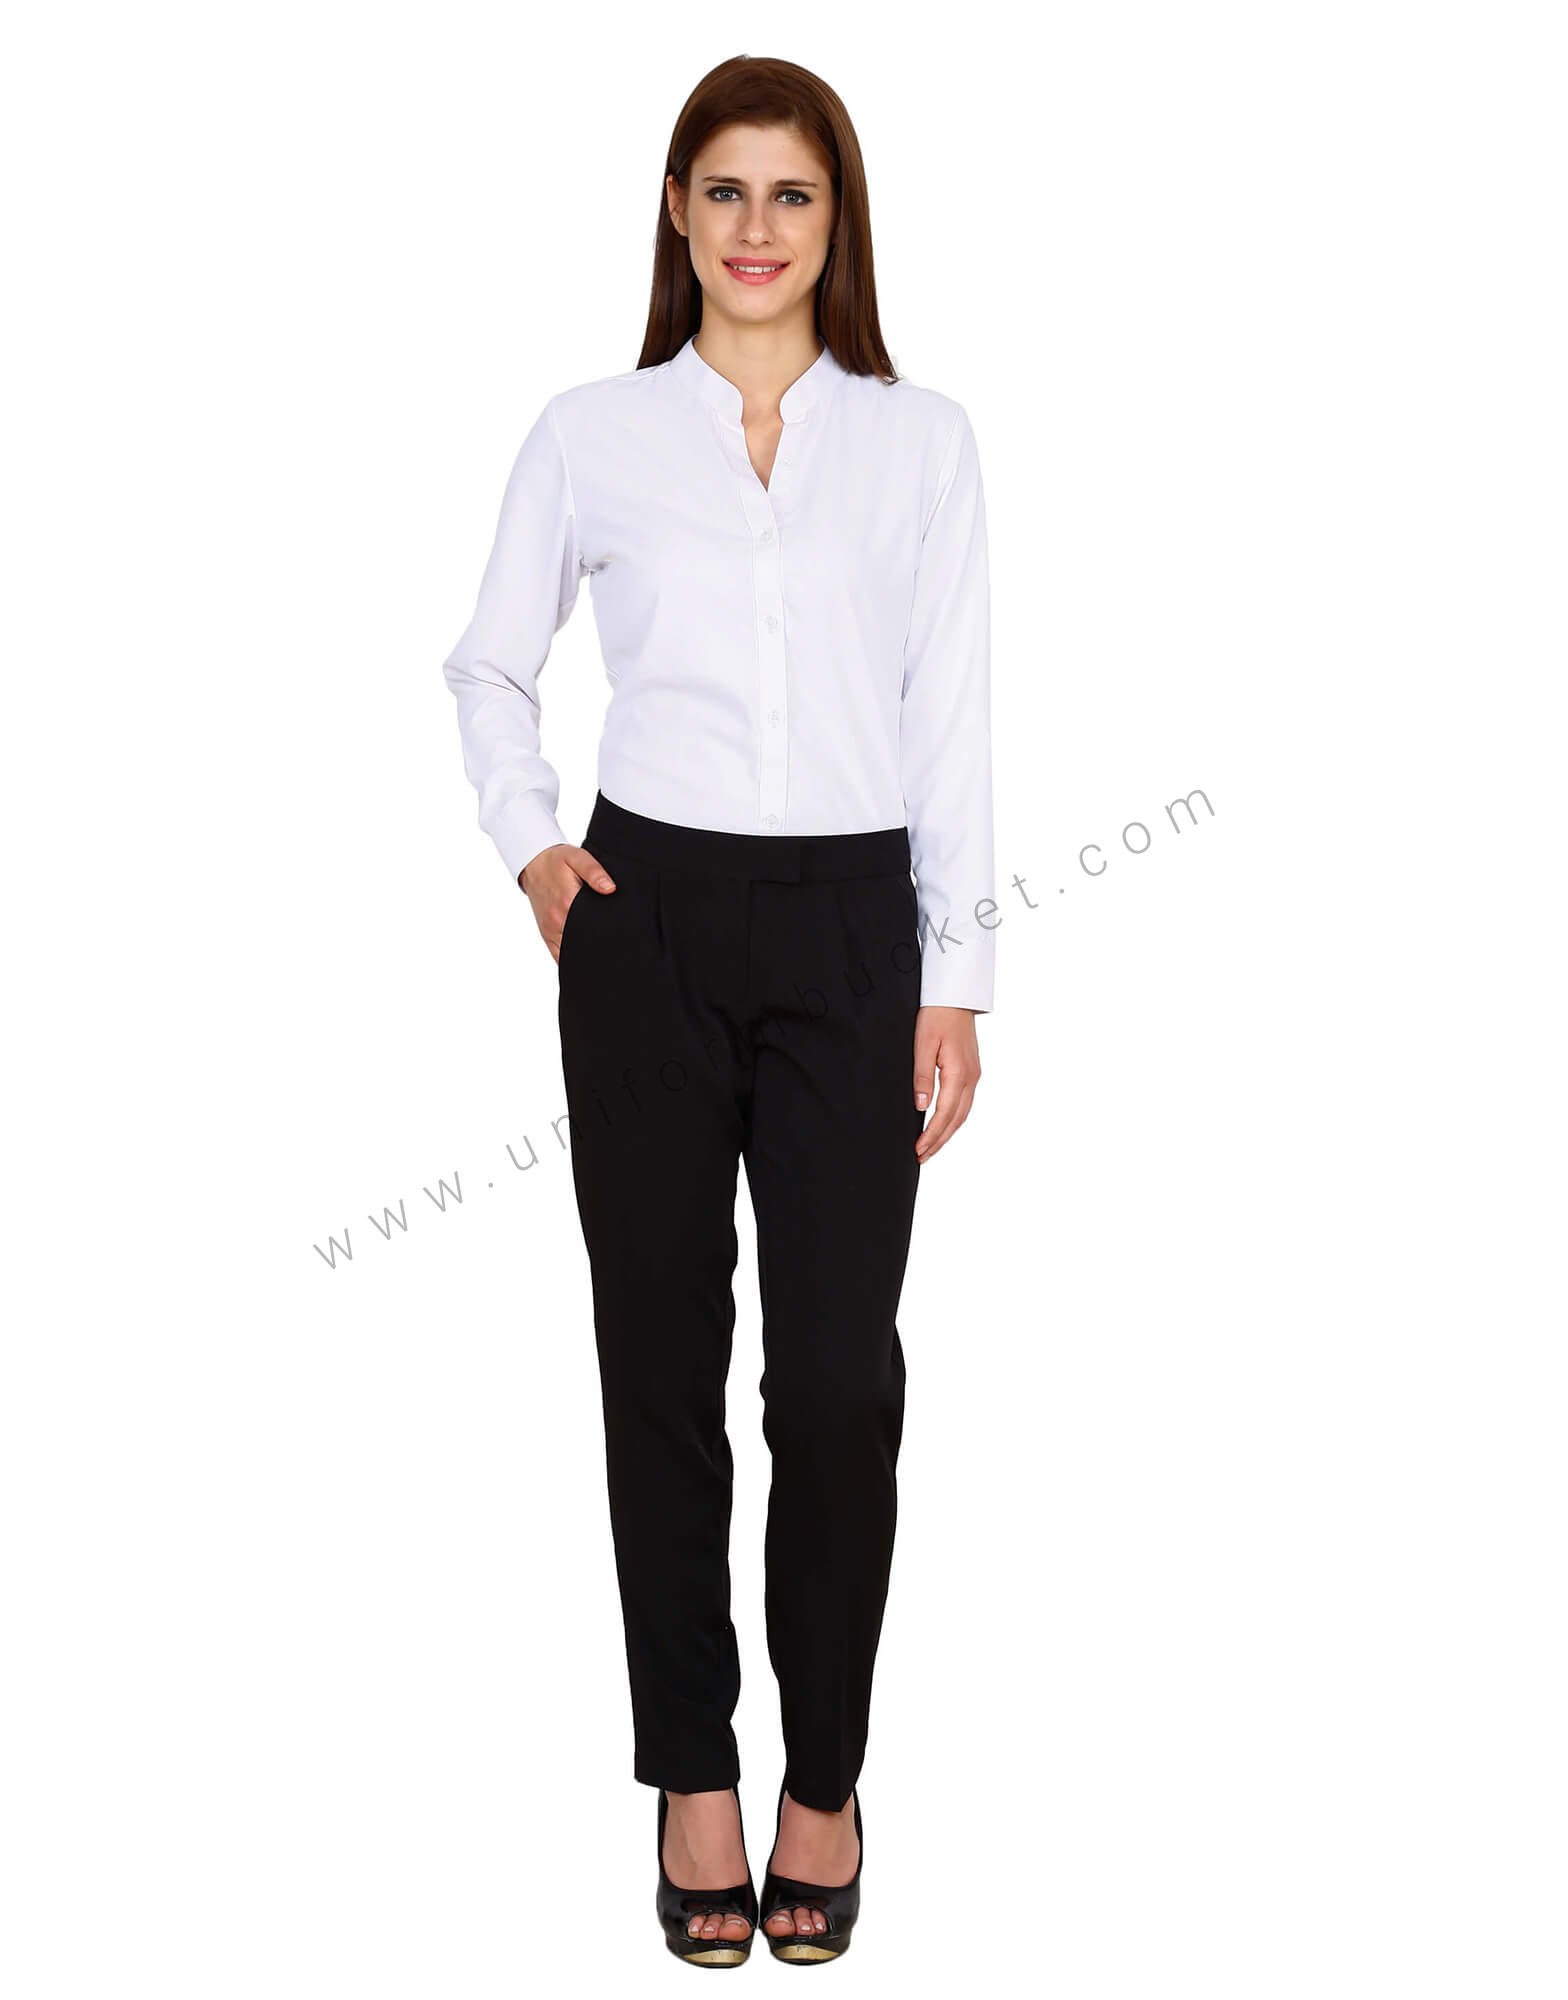 Corporate Top and Trouser material style for Ladies 2023